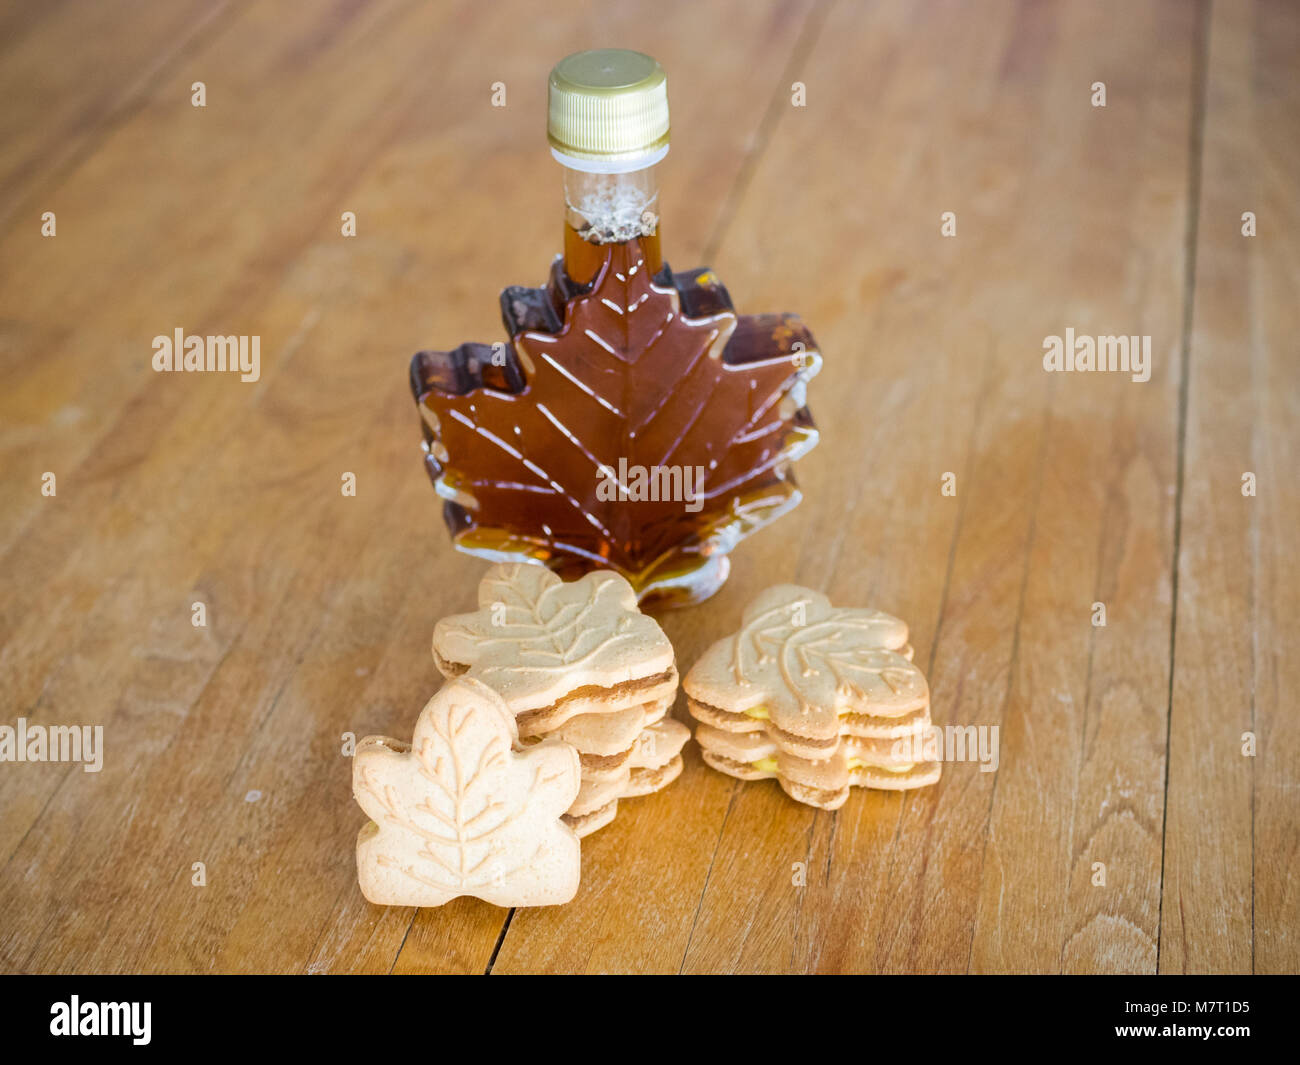 Delicious maple cookies (maple leaf cookies), made with real Canadian maple syrup. Stock Photo